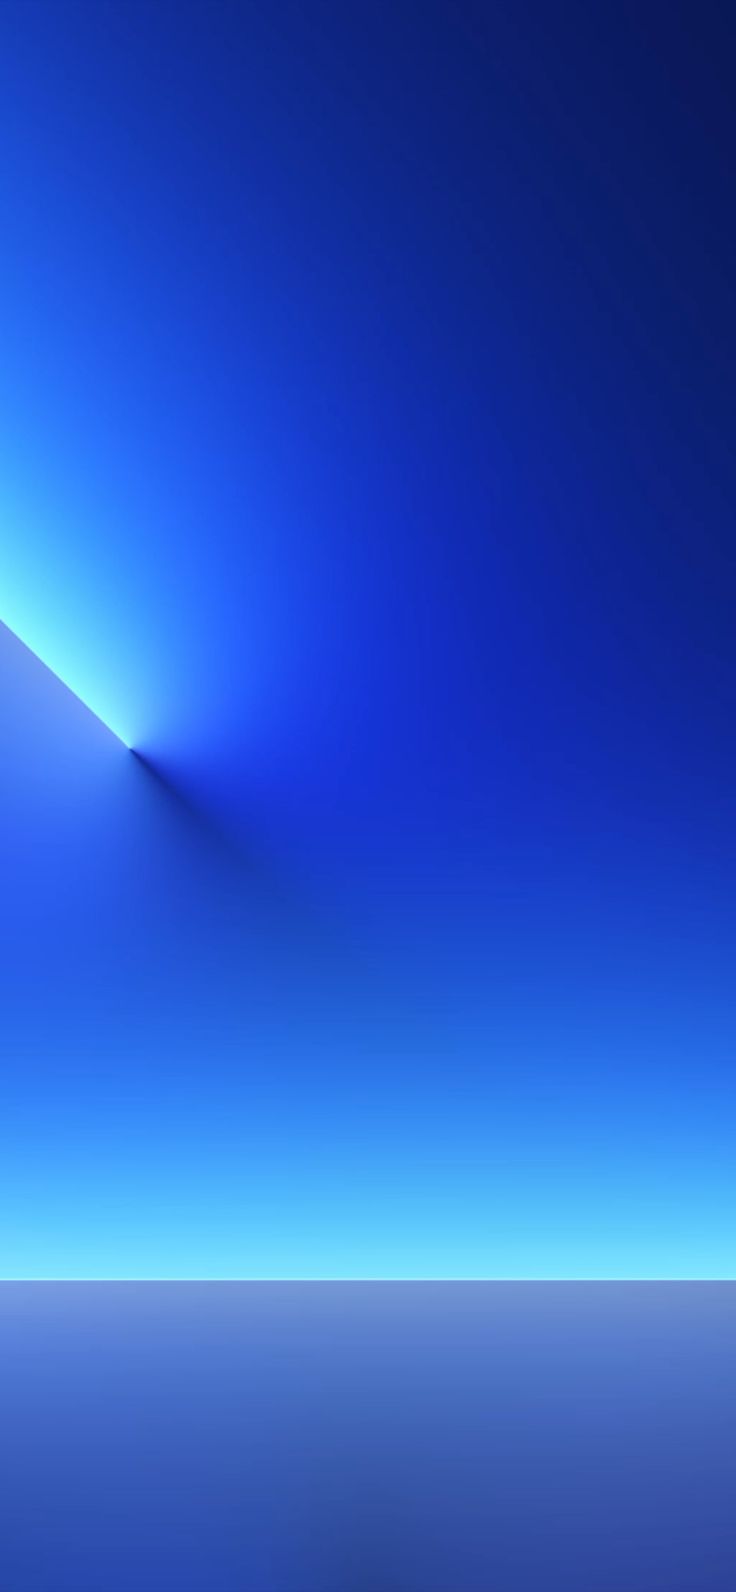 4K Iphone Blue Wallpapers